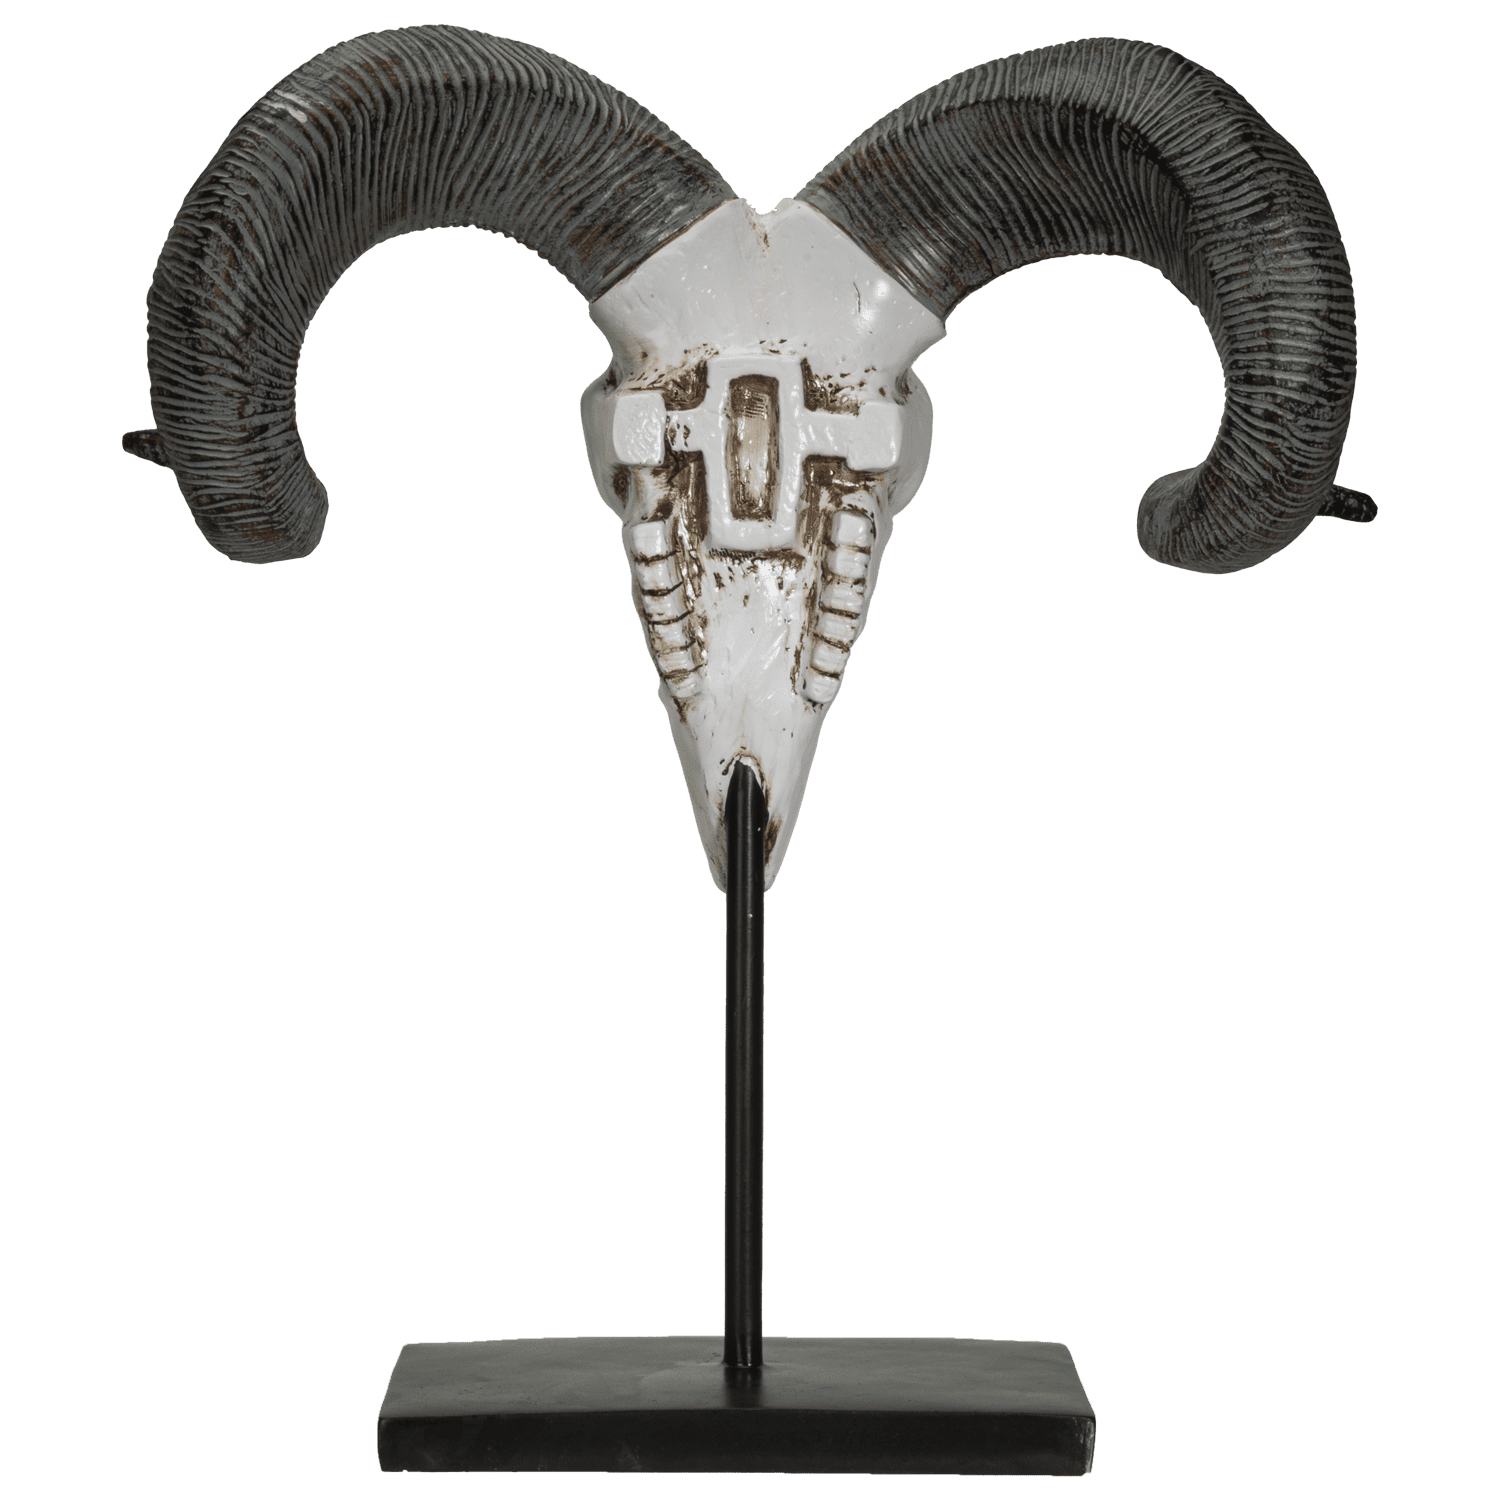 Palaney Corsican Ram Skull and Horns Trophy Wall Décor